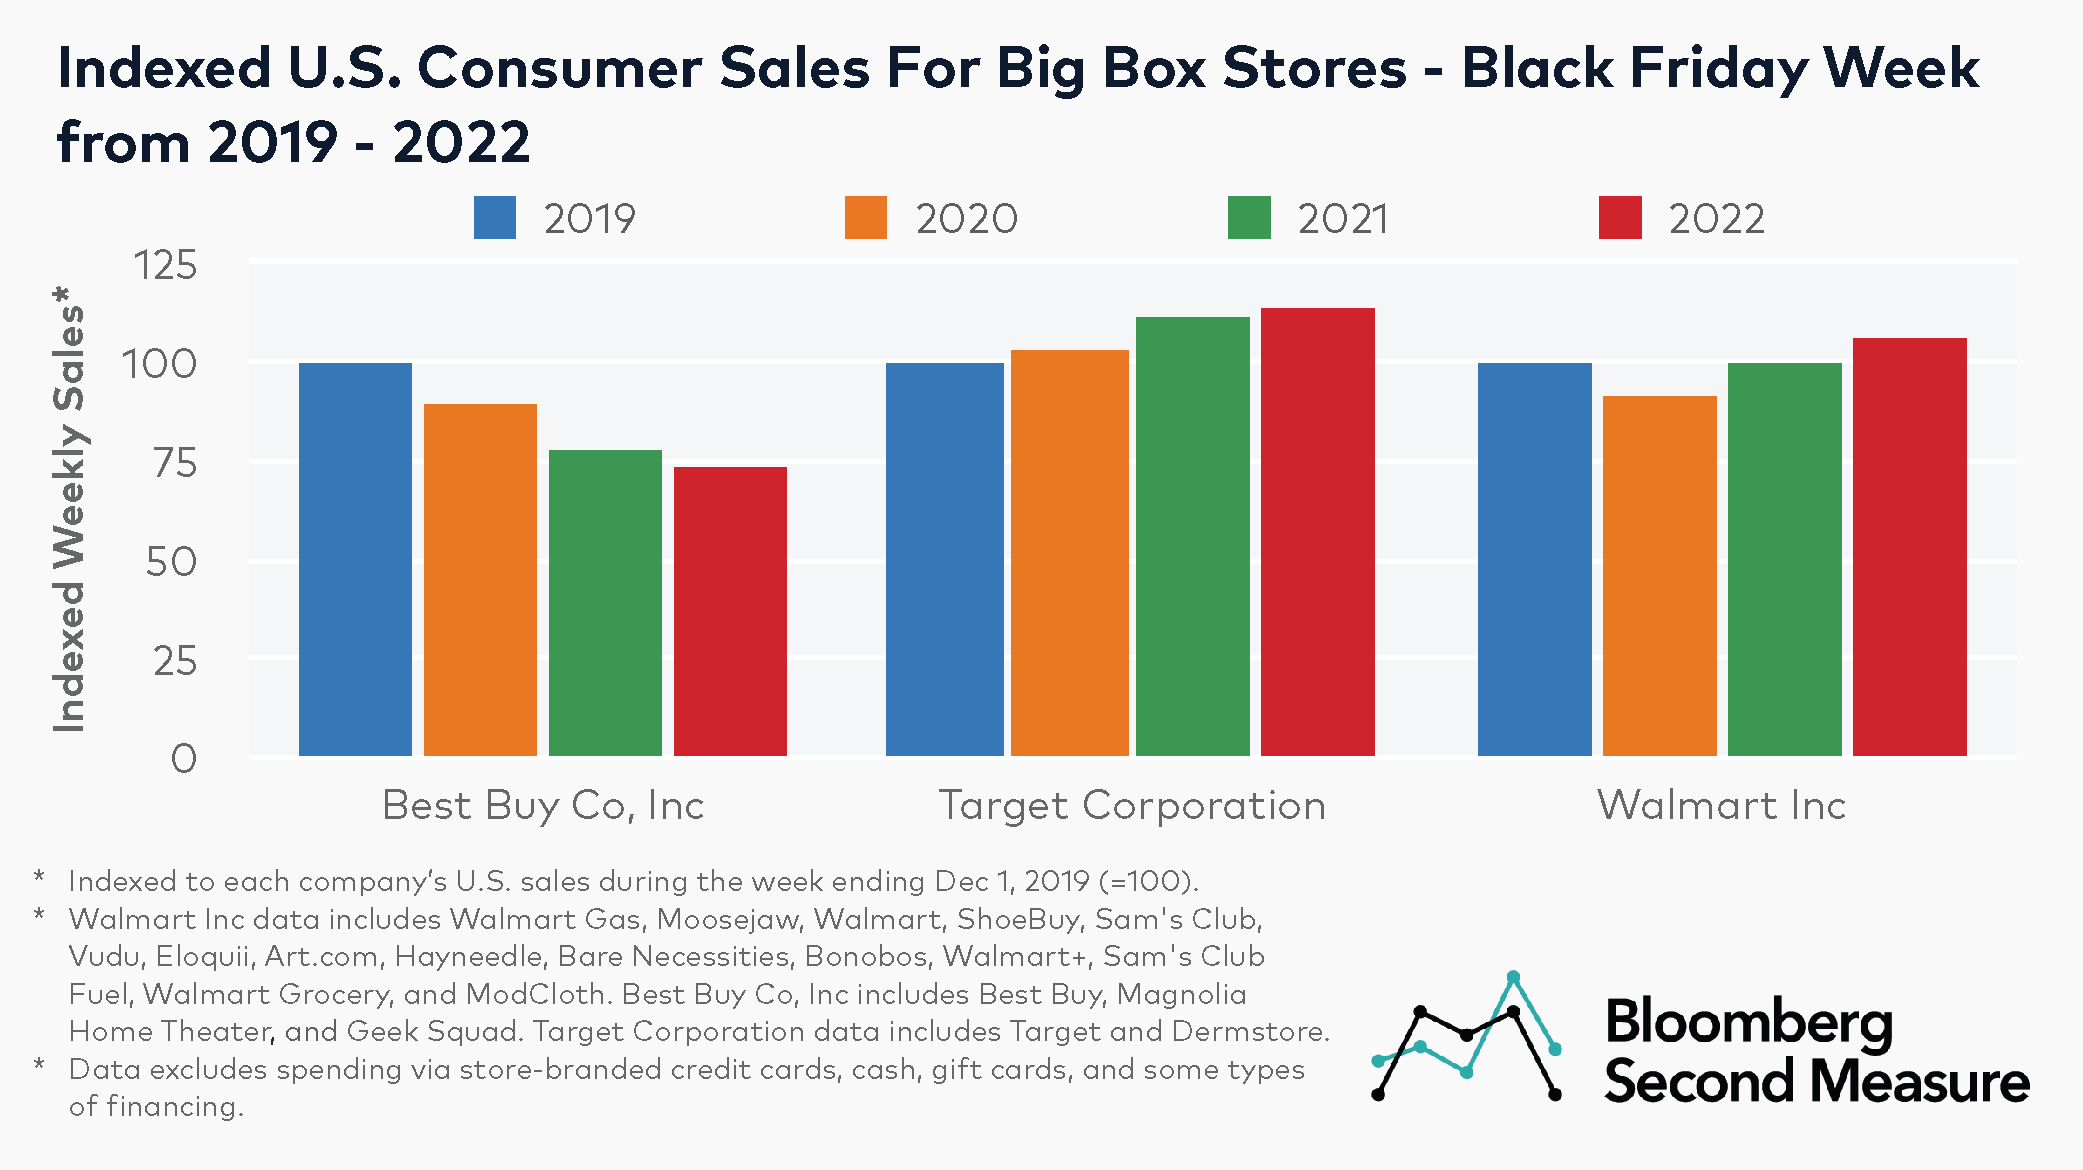 How did big-box retailers fare during the week of Black Friday 2022?